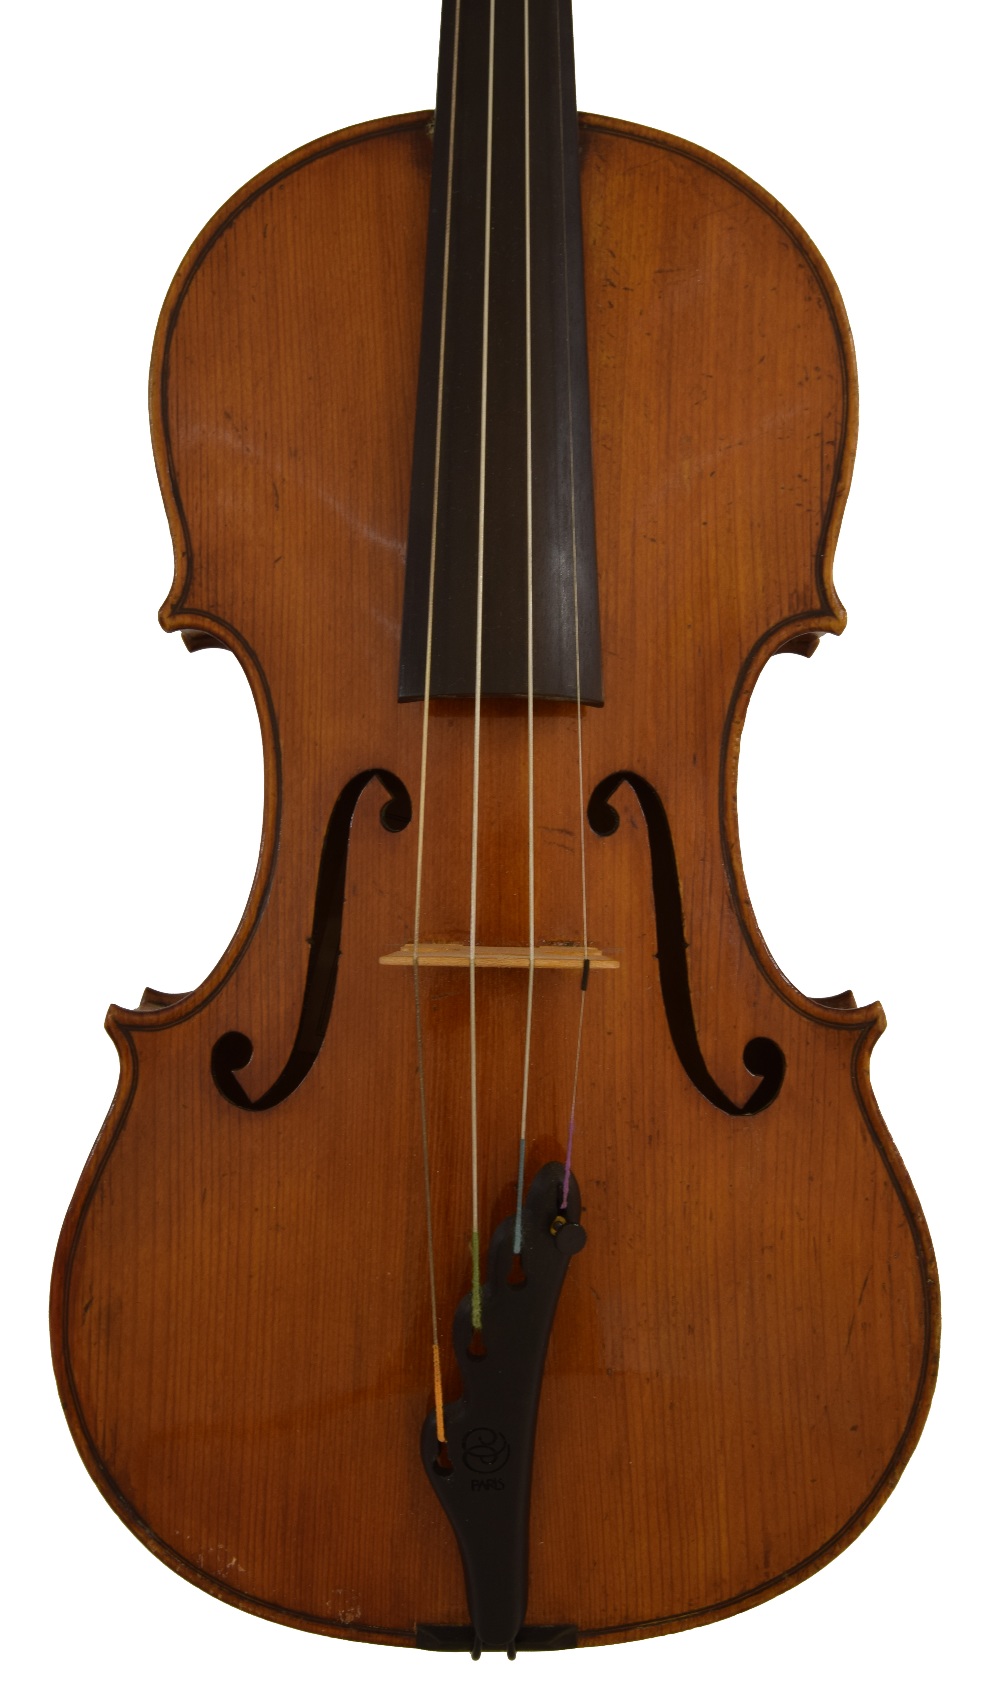 English violin by and labelled Made by John Smith, Teddington, London W., the one piece back of